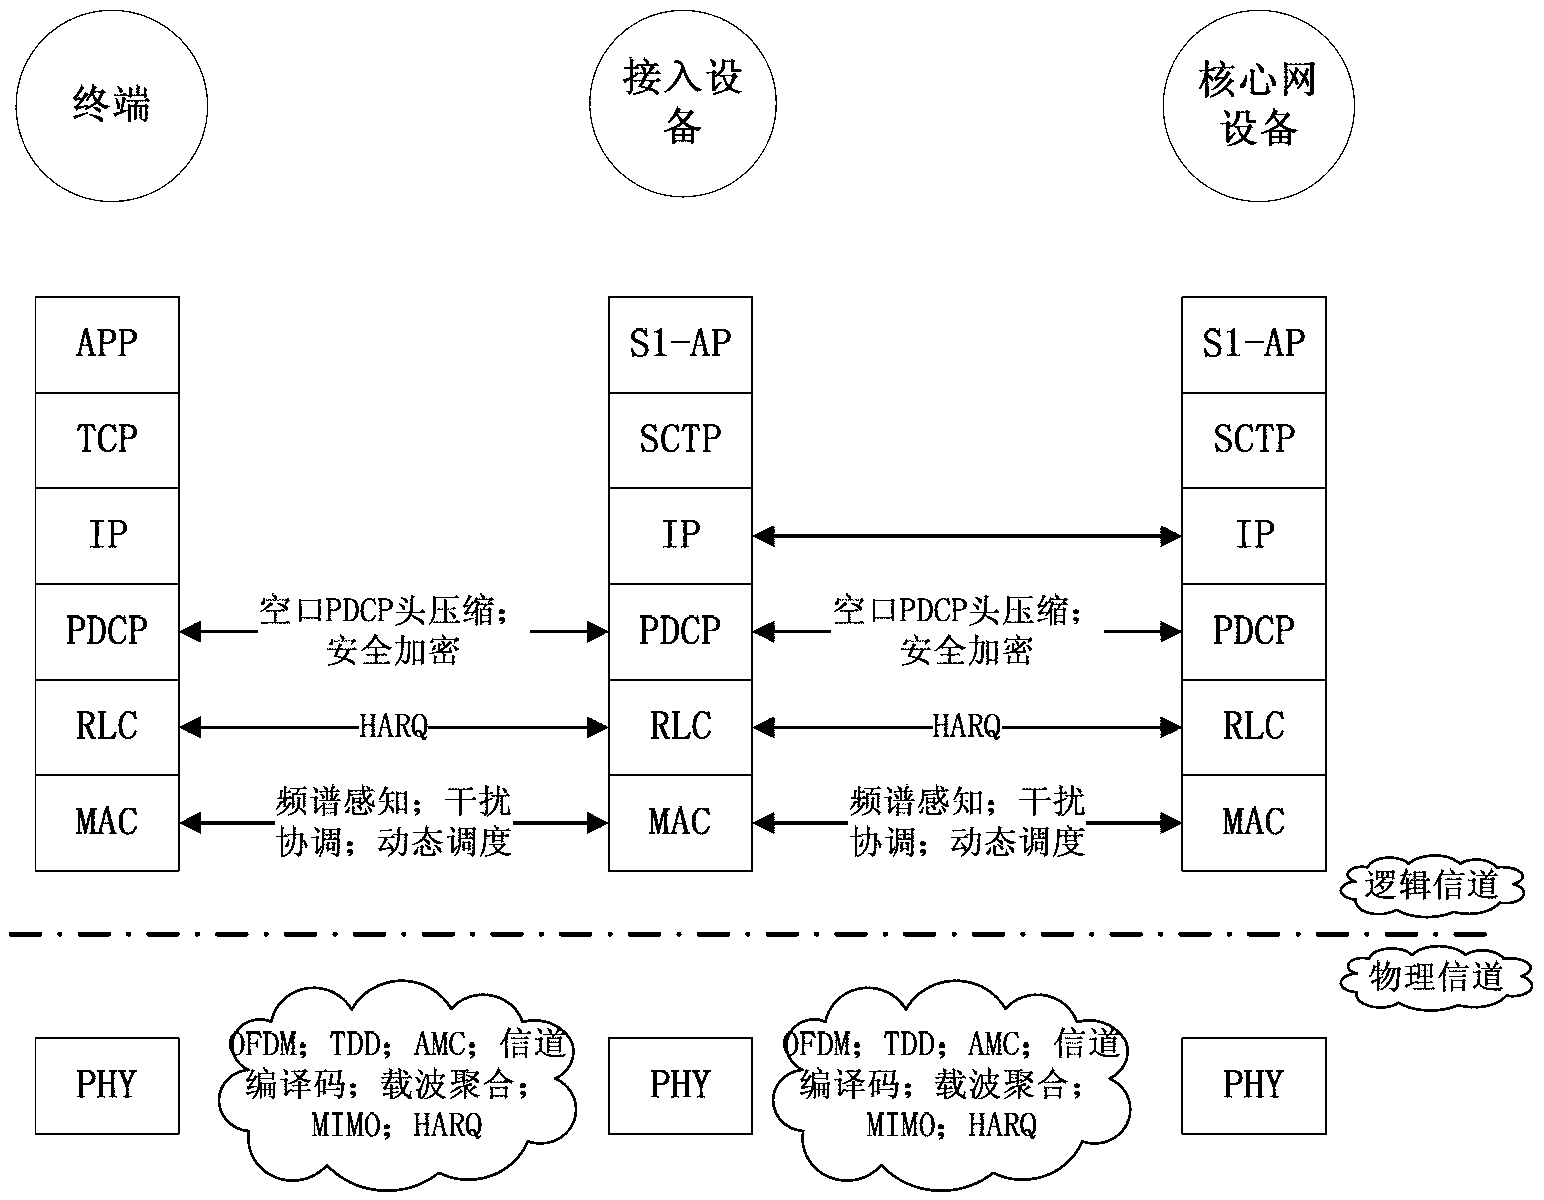 Method of wireless electricity transmission based on orthogonal frequency division multiplexing (OFDM)